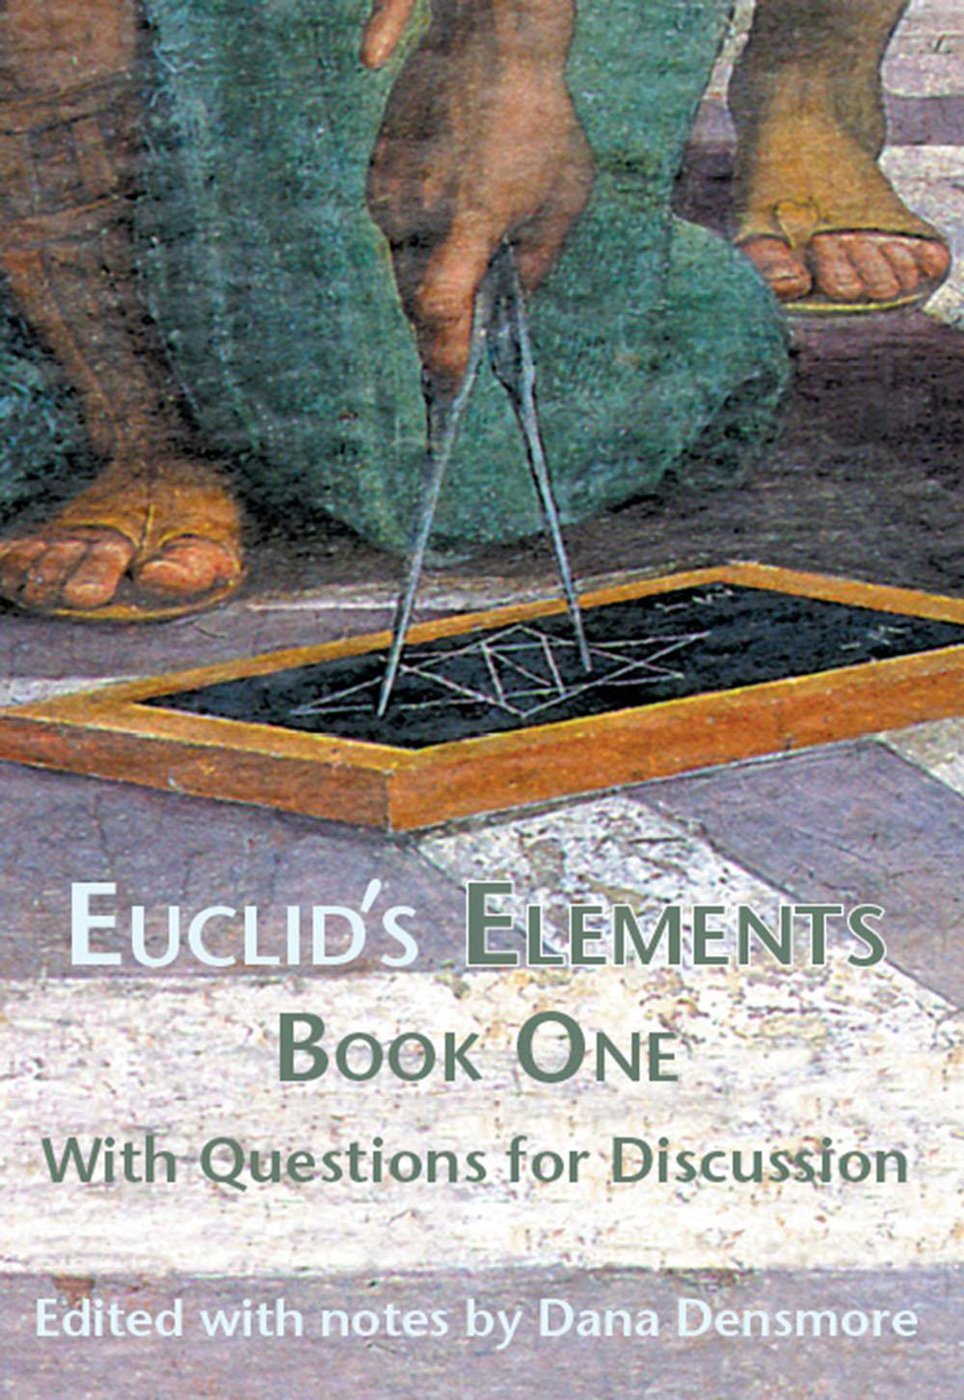 Euclid's Elements Book One